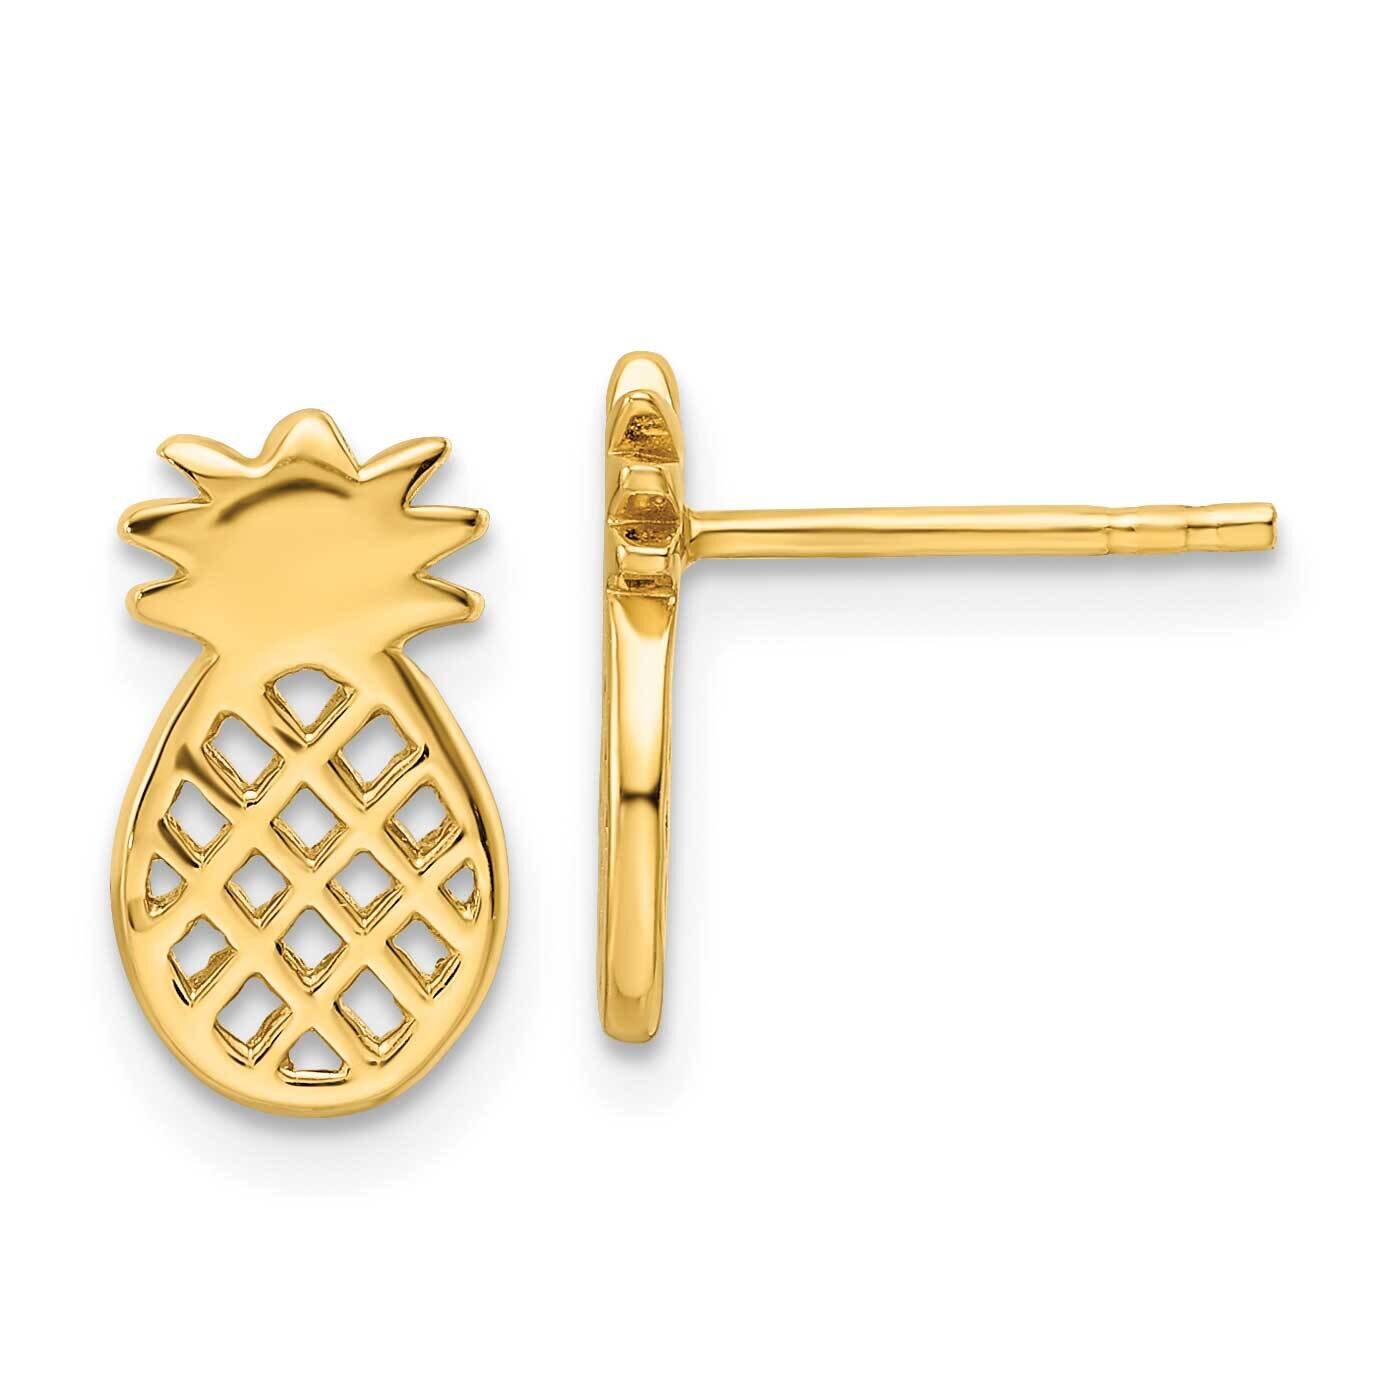 Pineapple Post Earrings Sterling Silver Gold-Plated QE15652